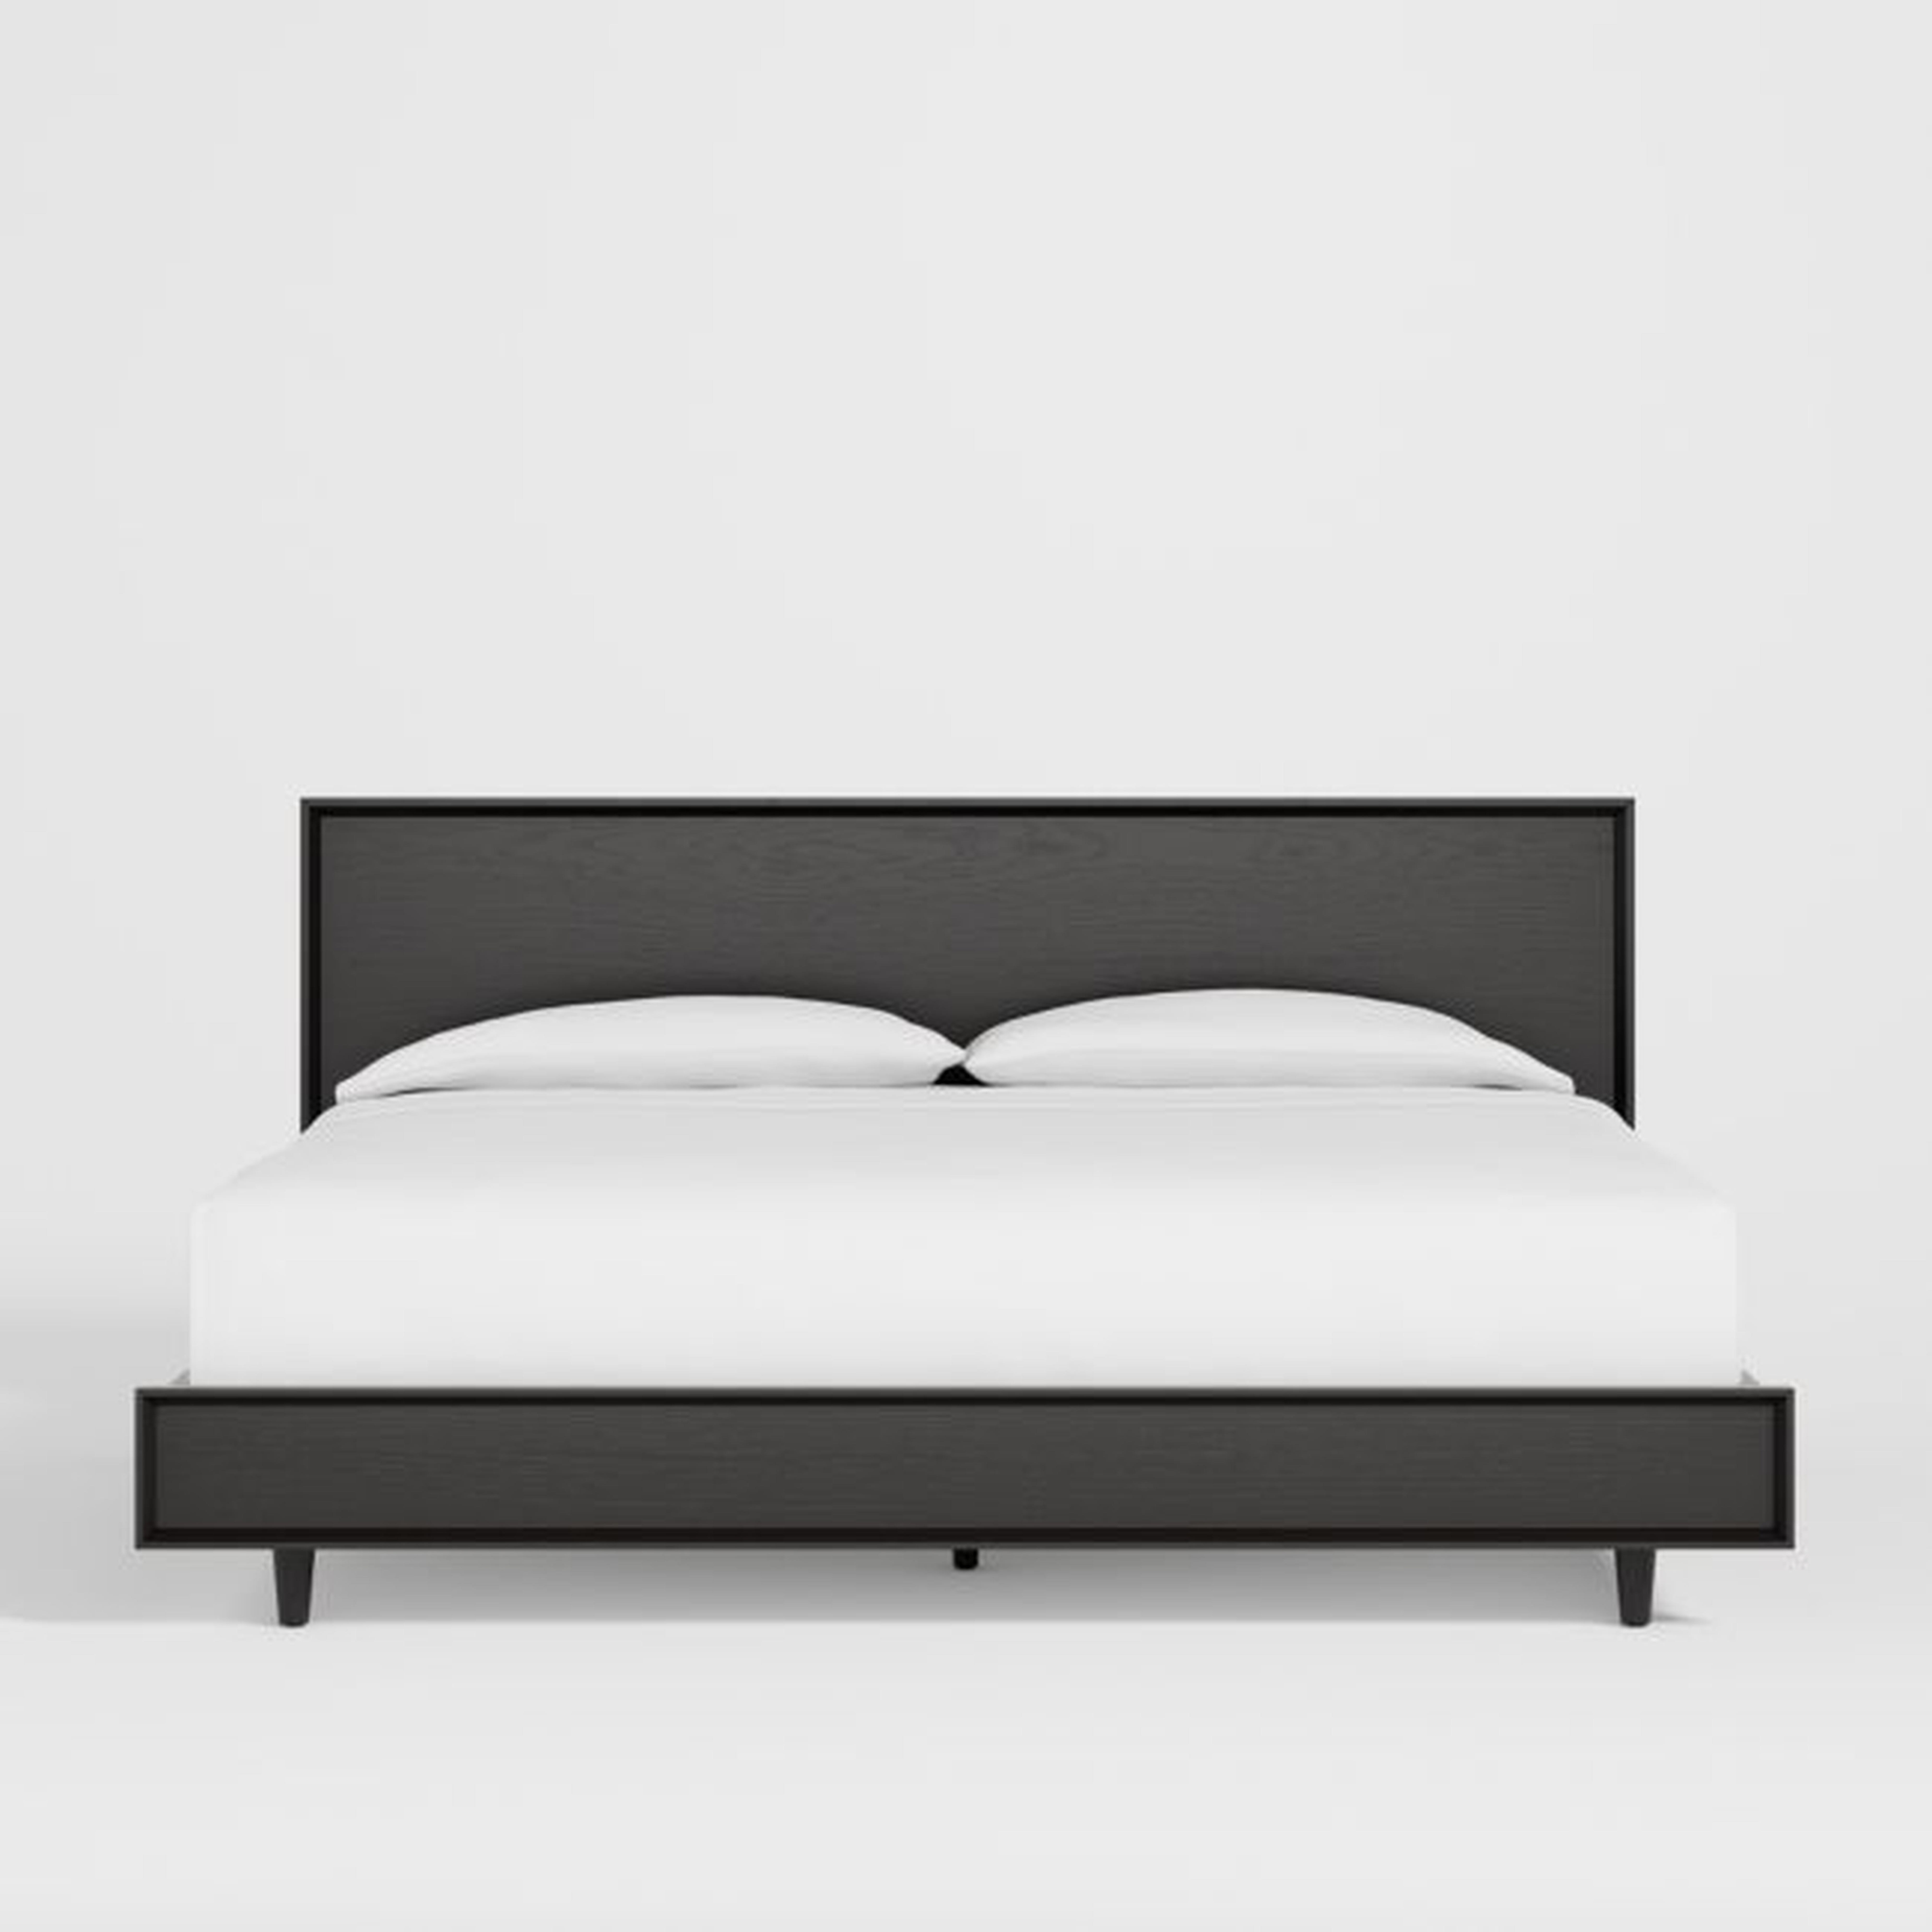 Tate Black King Wood Bed - Crate and Barrel